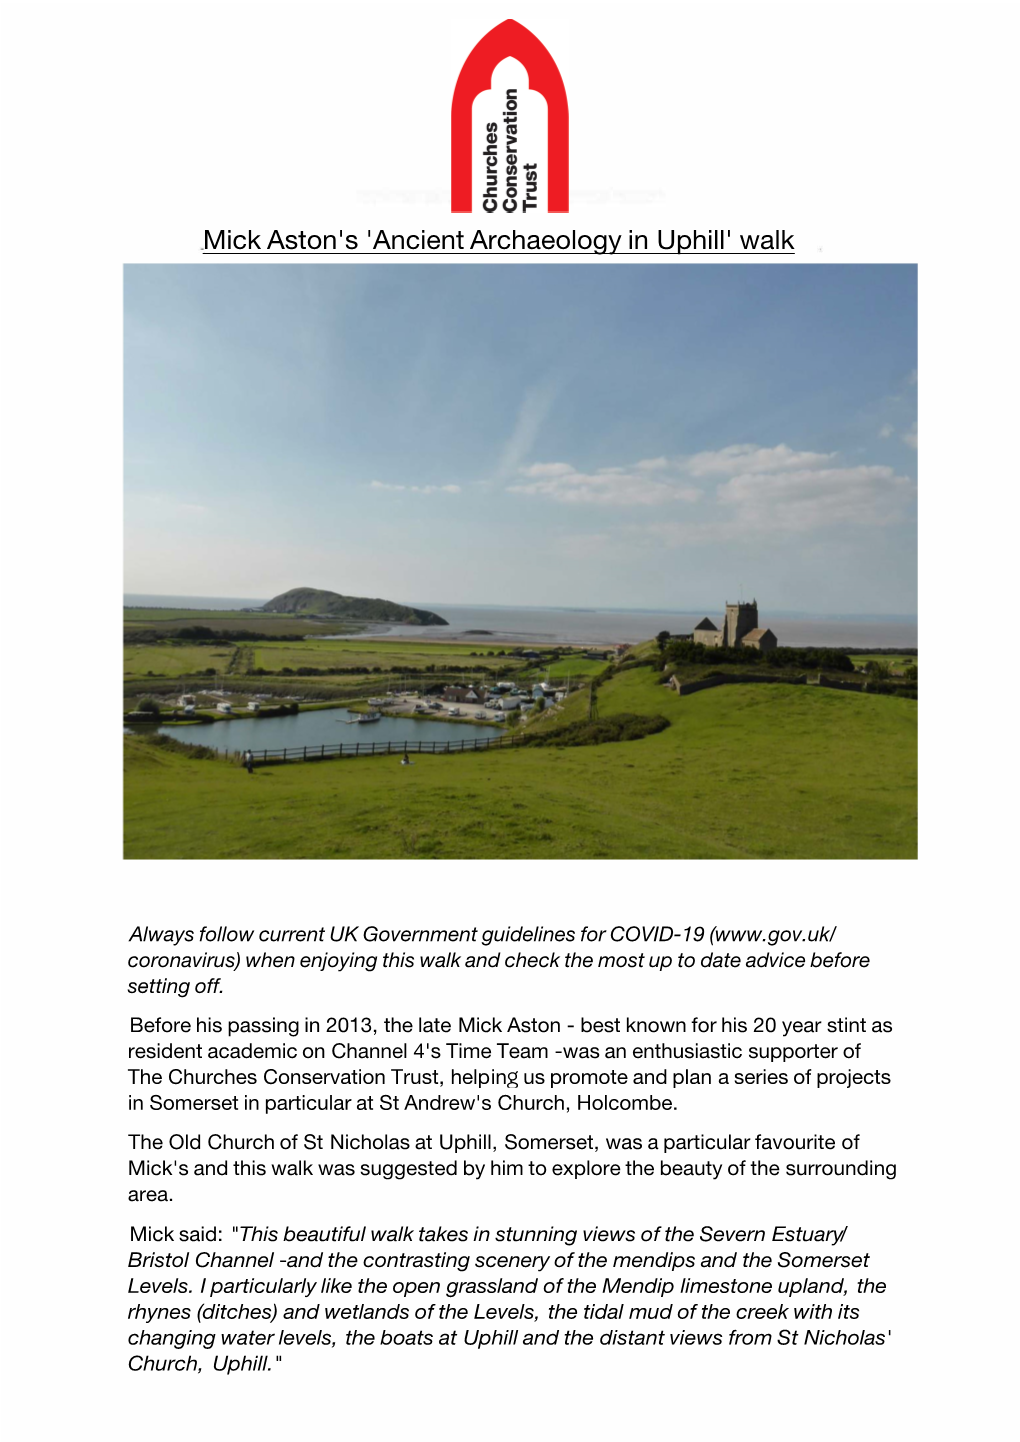 Mick Aston's 'Ancient Archaeology in Uphill' Walk